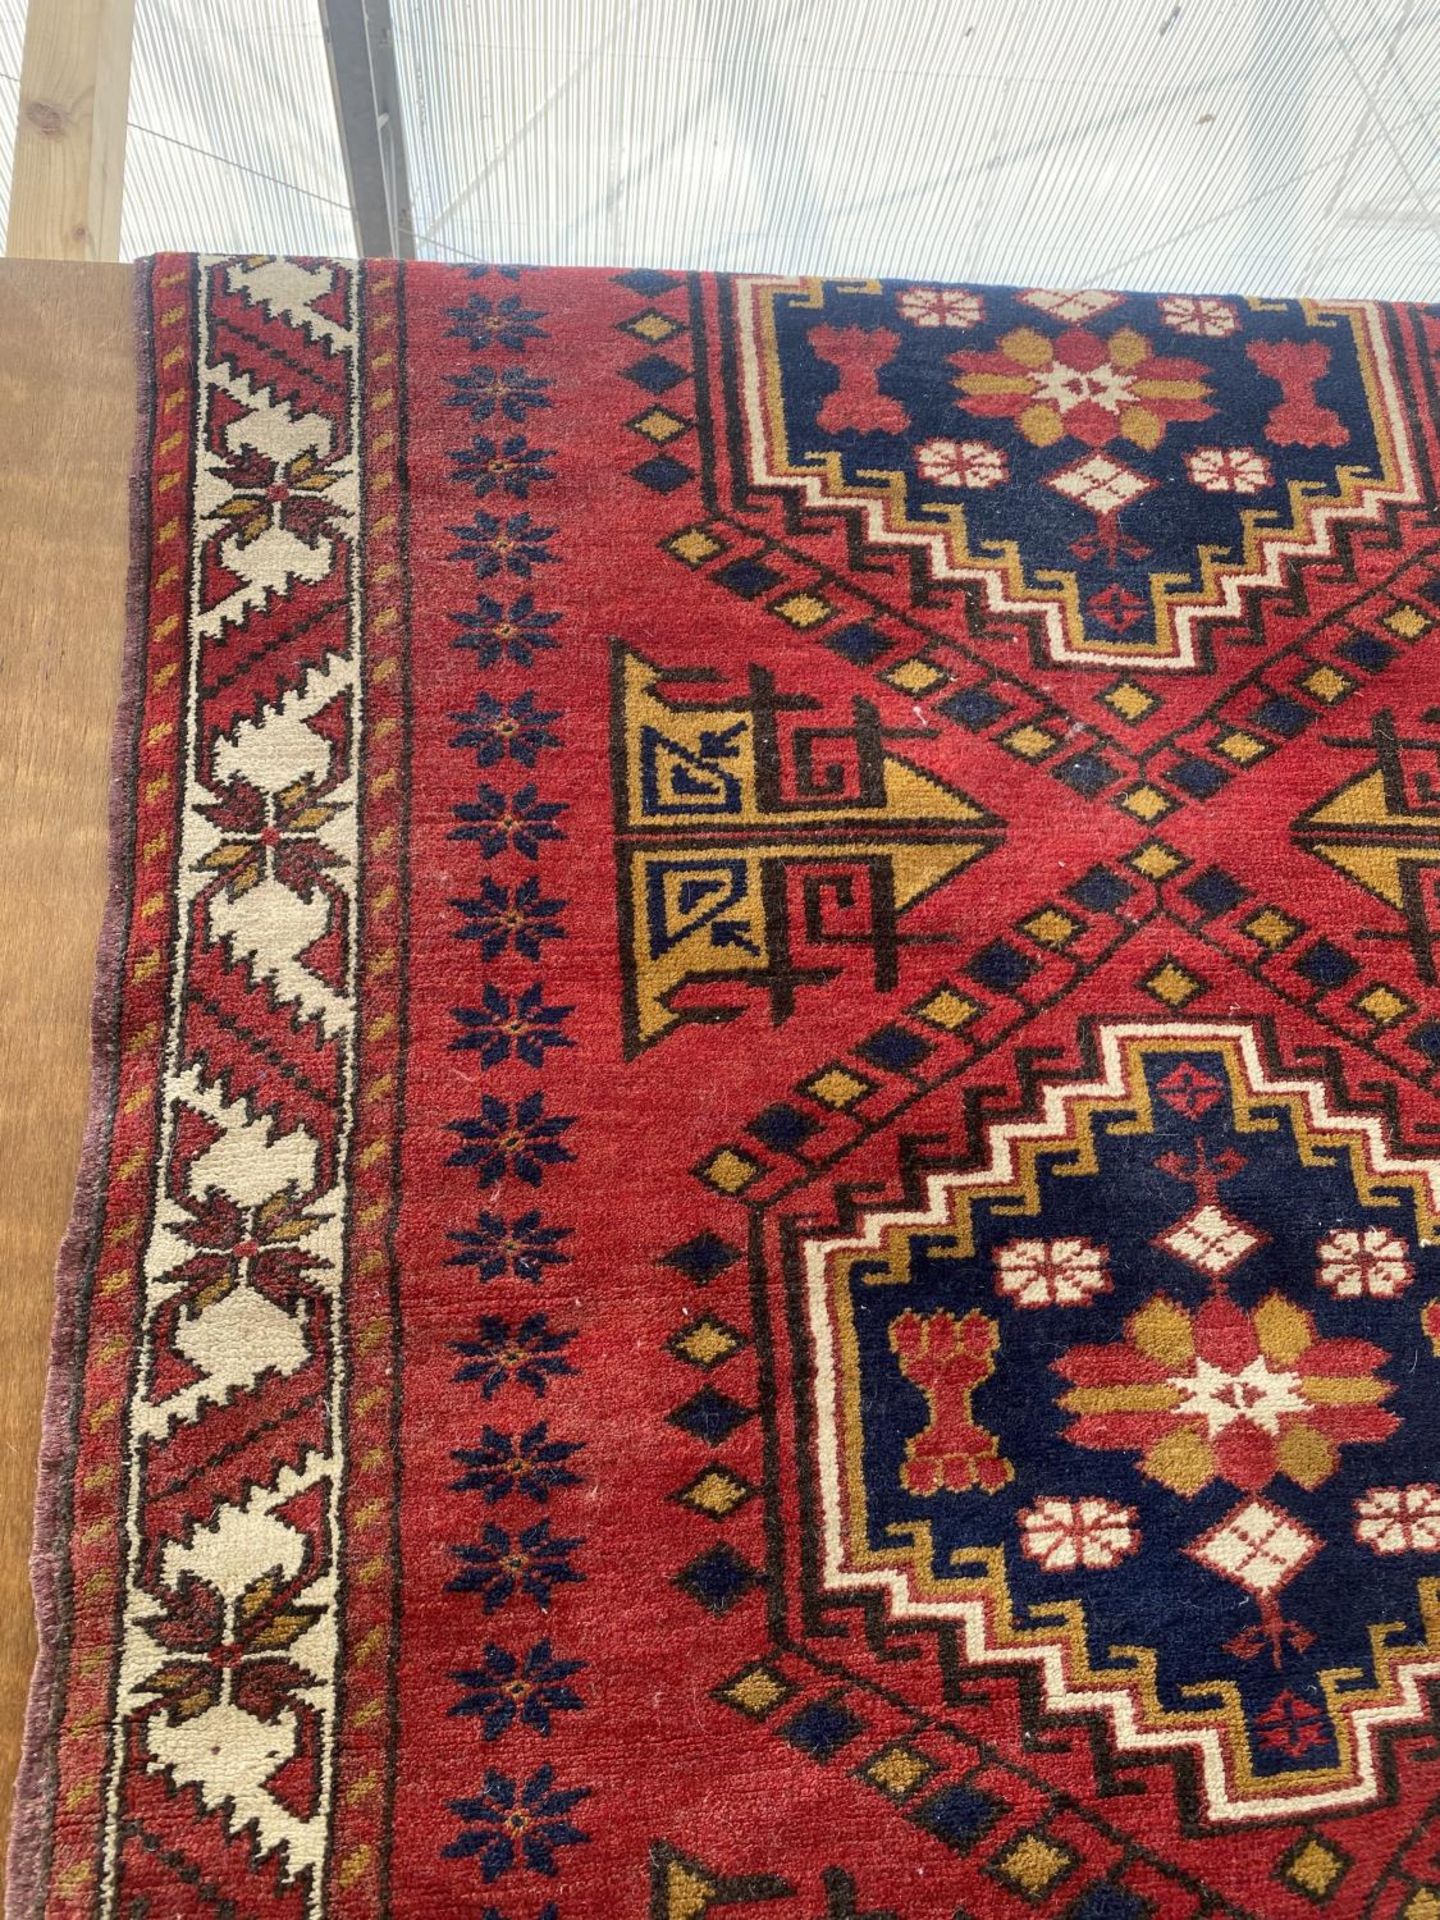 A RED PATTERNED RUG - Image 4 of 4